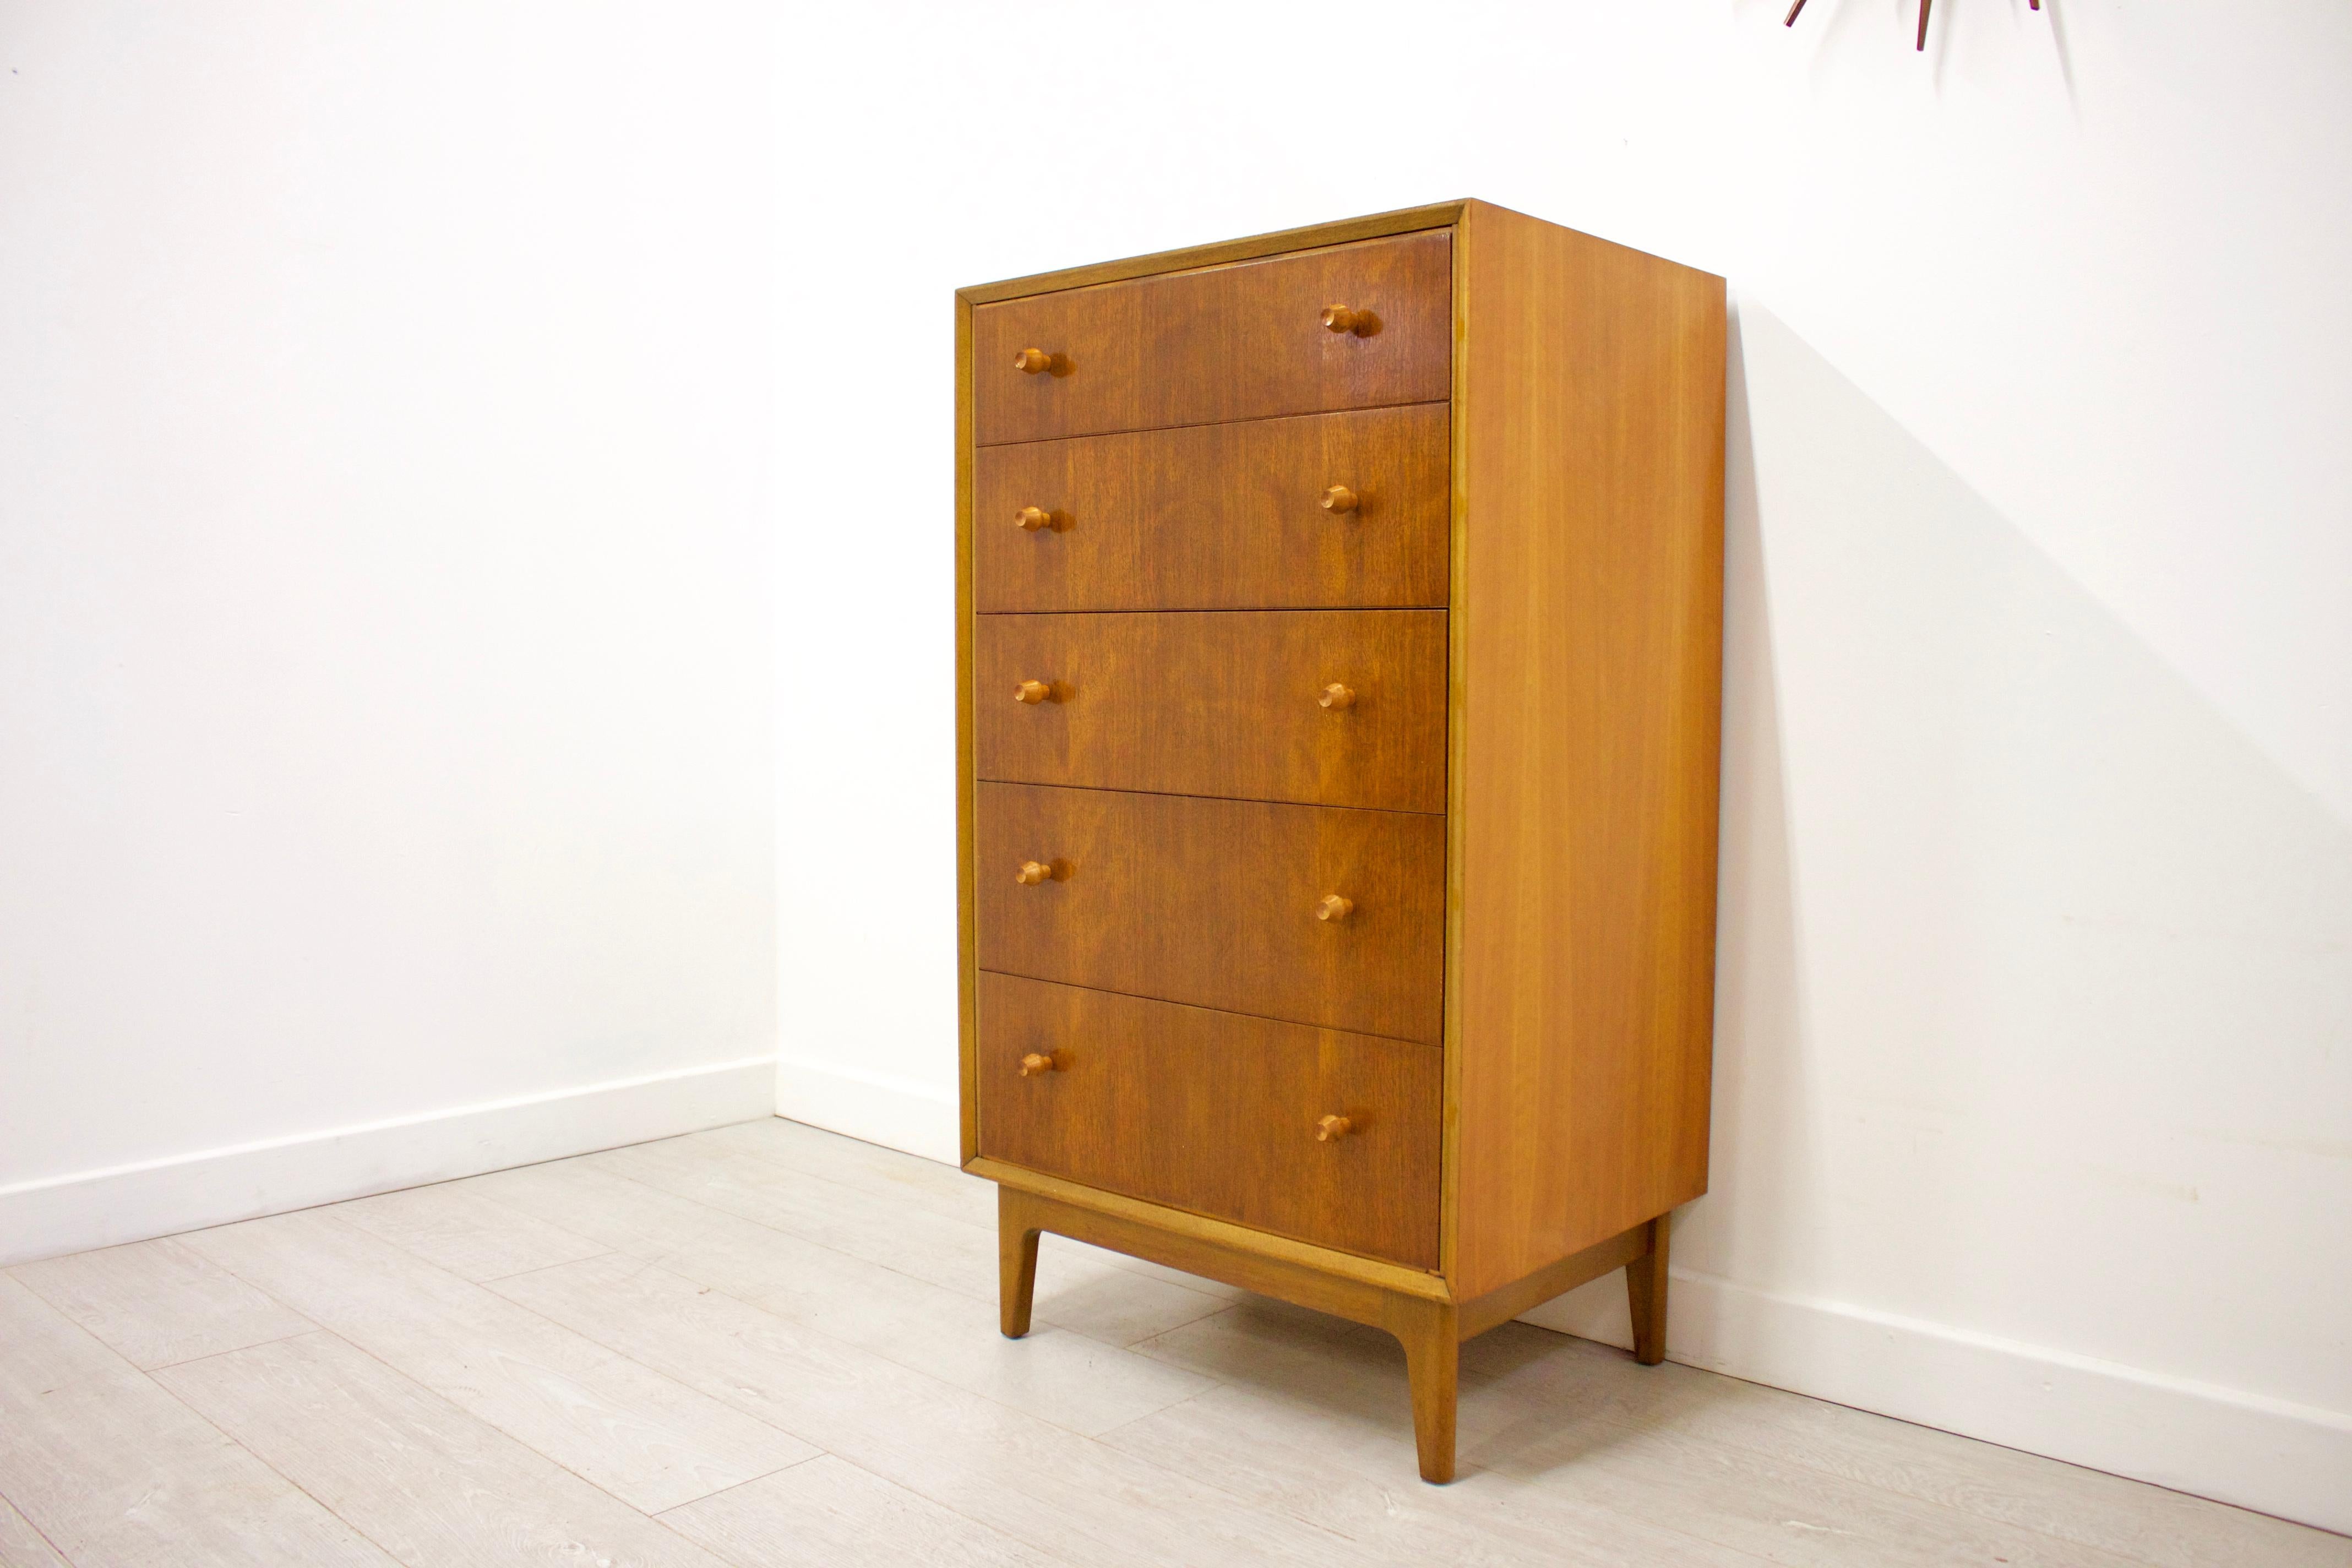 - Midcentury chest of drawers
- Manufactured in UK by Vesper
- Made from solid teak and walnut veneer
- Features 5 drawers for ample storage.